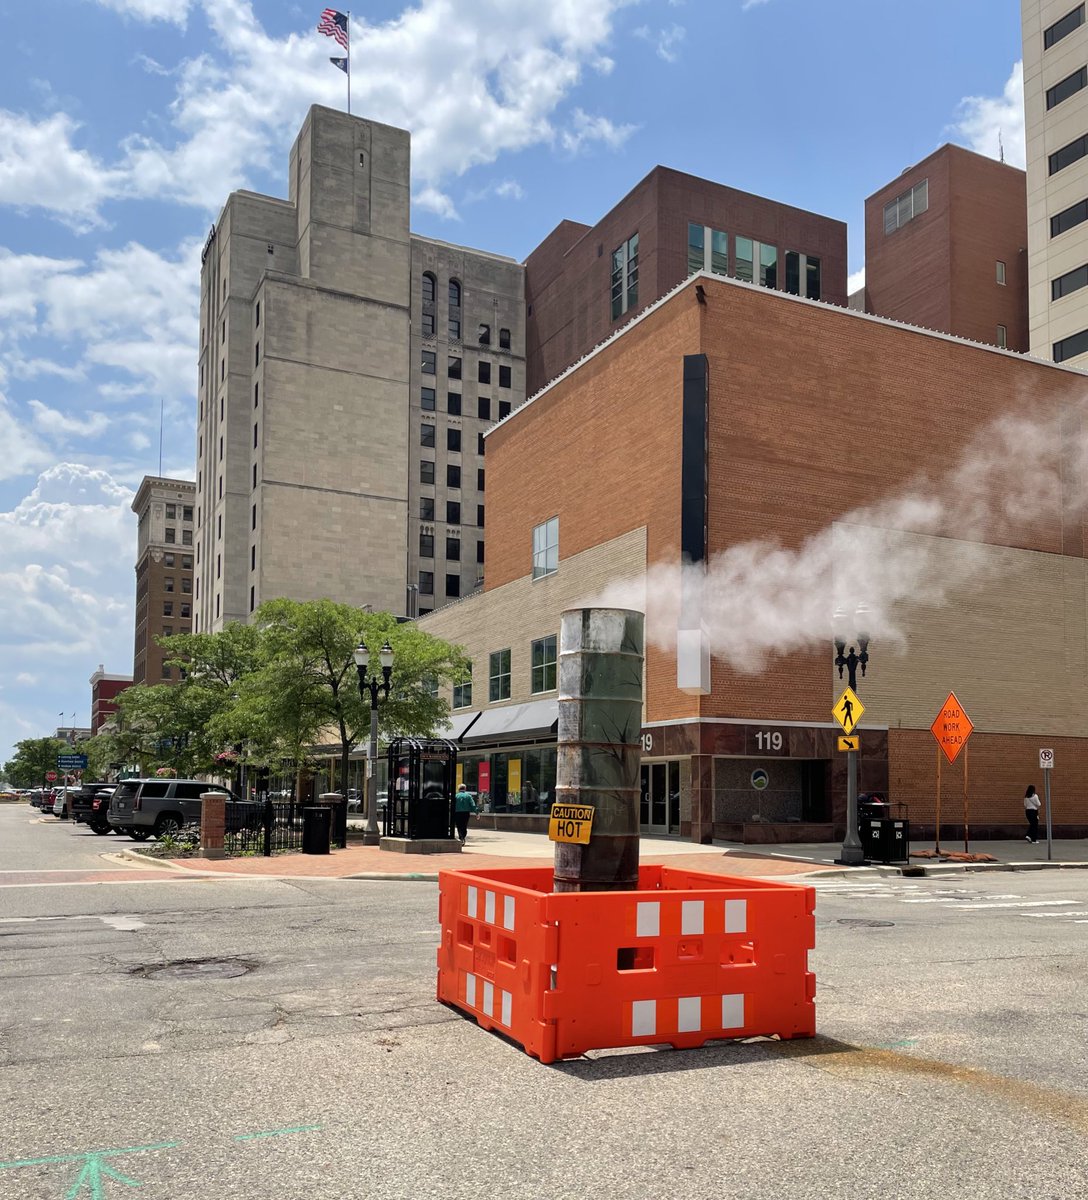 Lansing is a 21st century city that is well positioned to play a big role in the knowledge economy and also sometimes we have to put a big pipe in the road because ground too hot